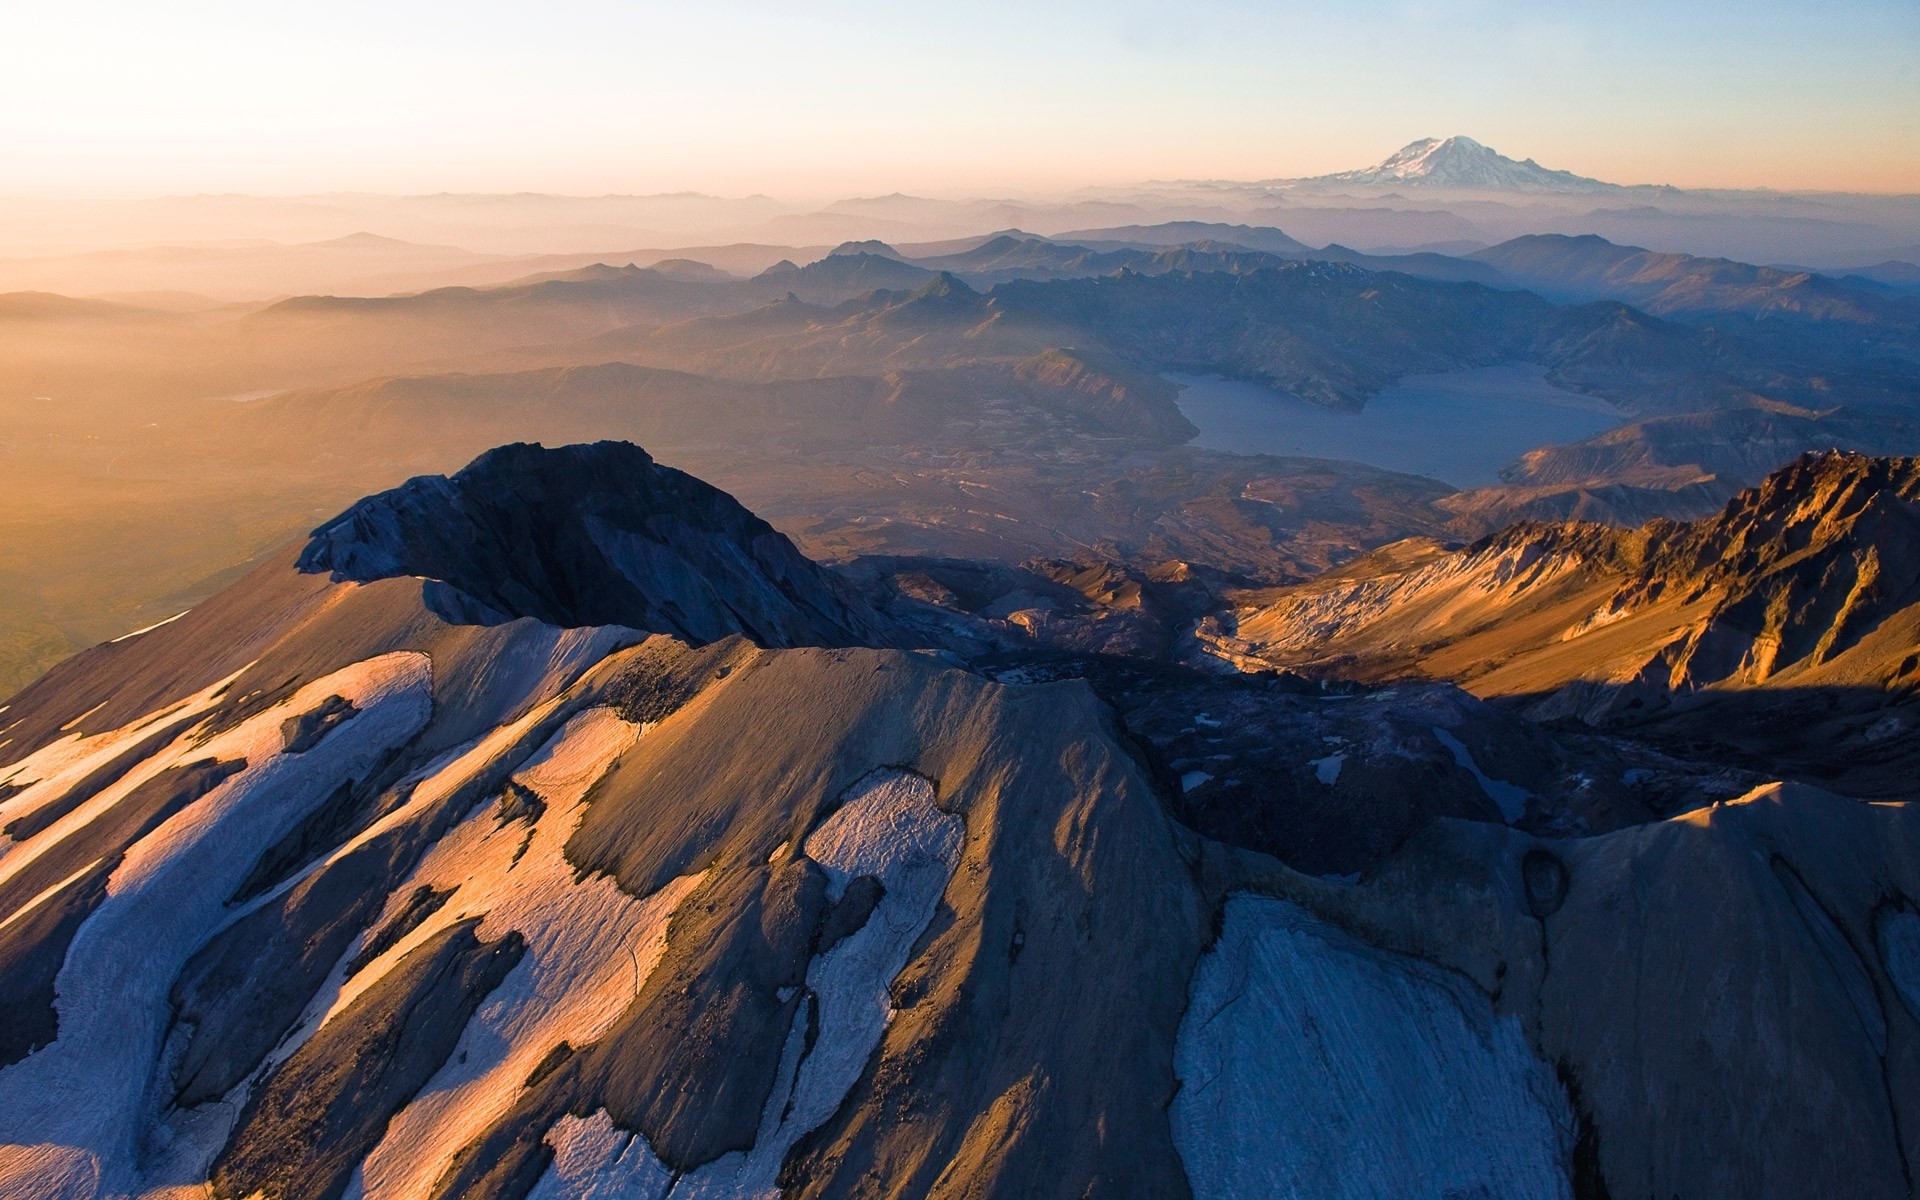 General 1920x1200 mountains Mount St.  Helens lake snowy peak mist volcano Washington State nature landscape morning aerial view